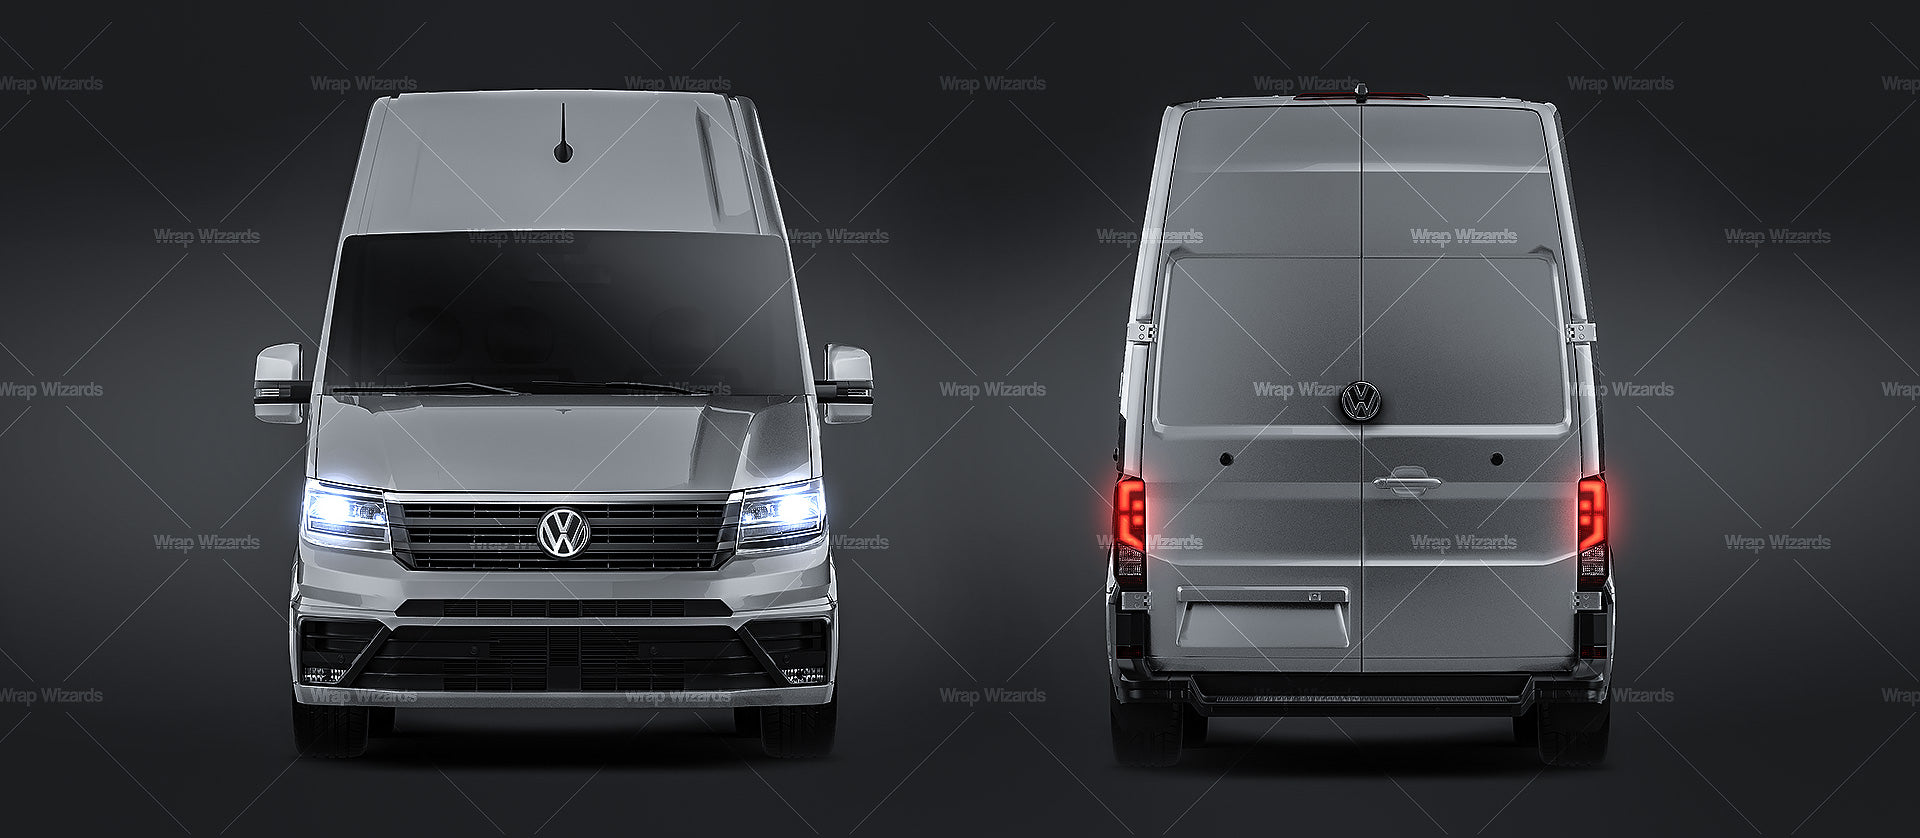 Volkswagen Crafter L3H3 glossy finish - all sides Car Mockup Template.psd